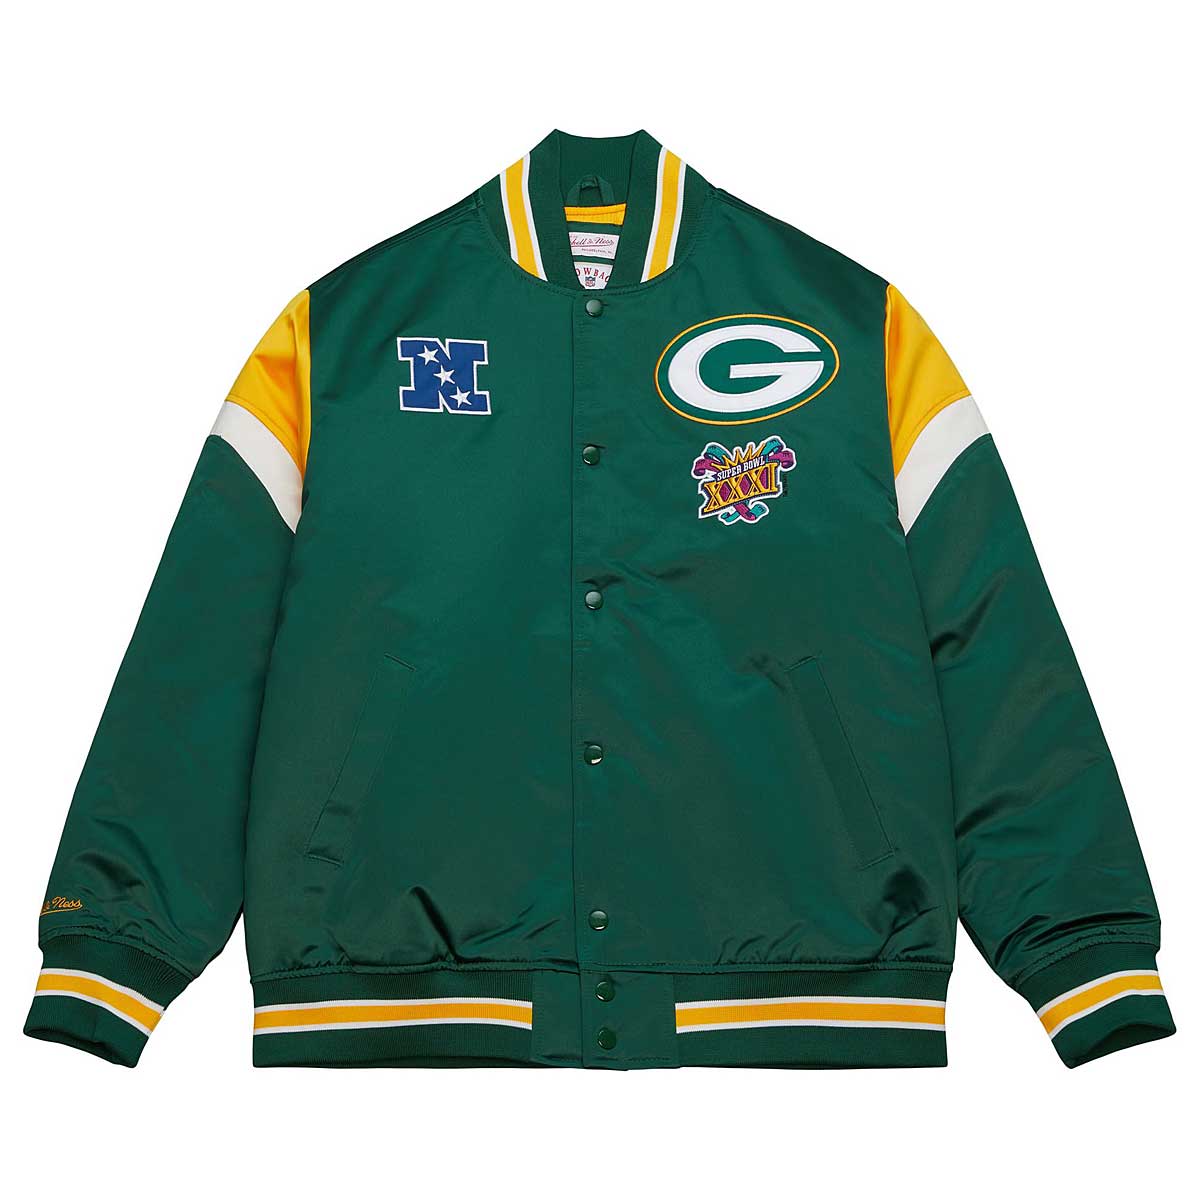 Image of Mitchell And Ness NFL Heavyweight Satin Jacket Green Bay Packers, Bucks Green